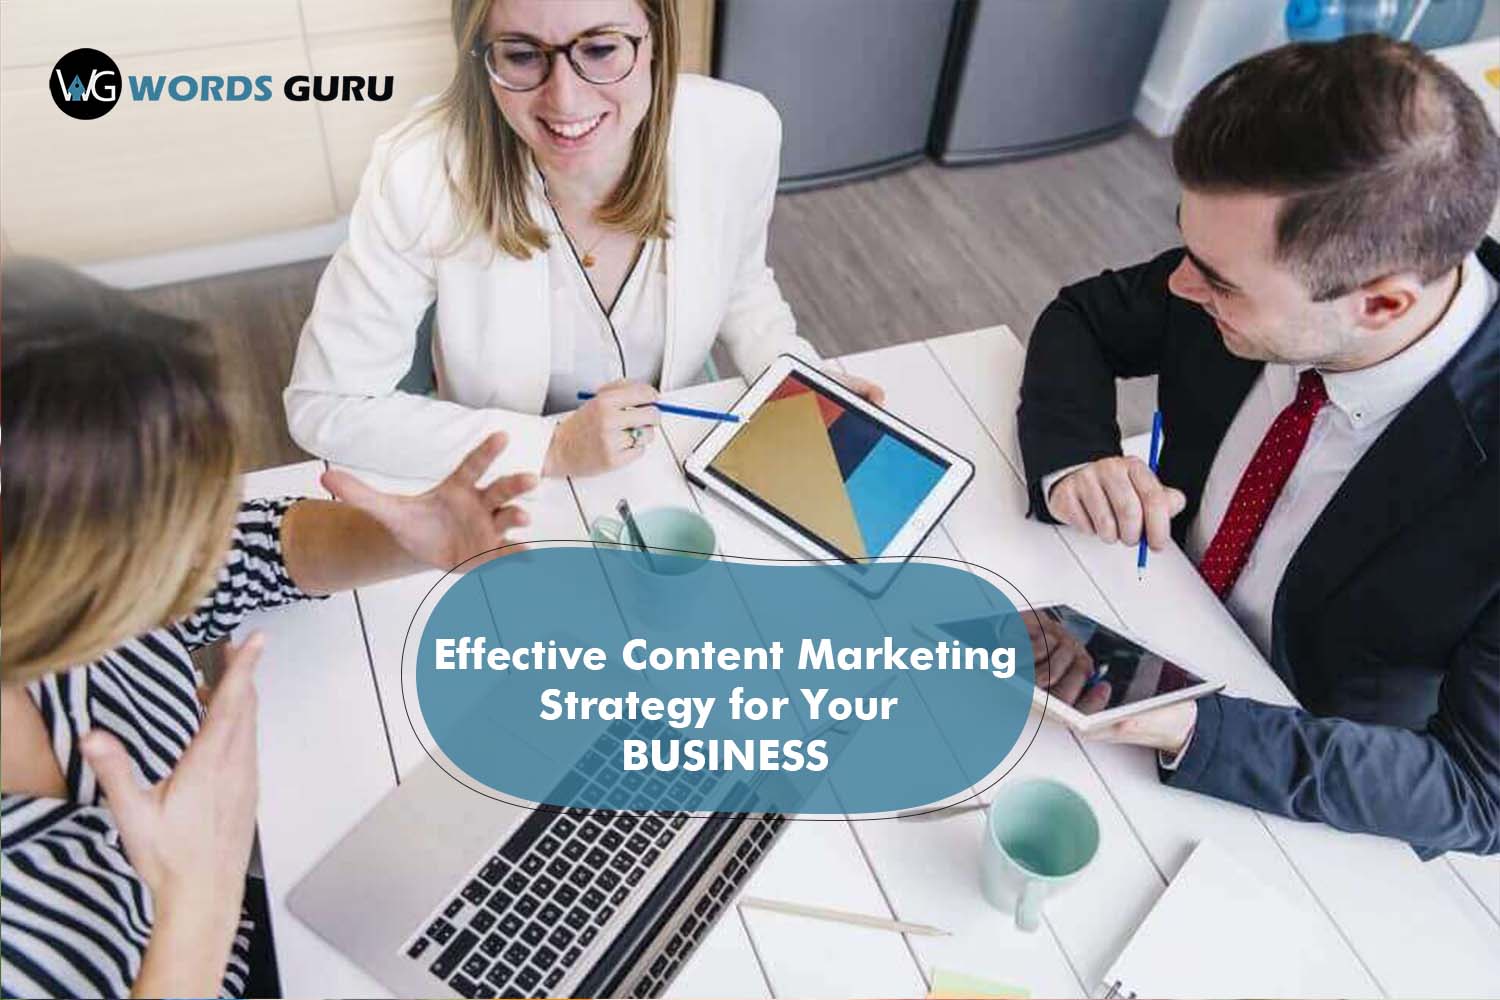 Convert Customers With an Effective Content Marketing Strategy